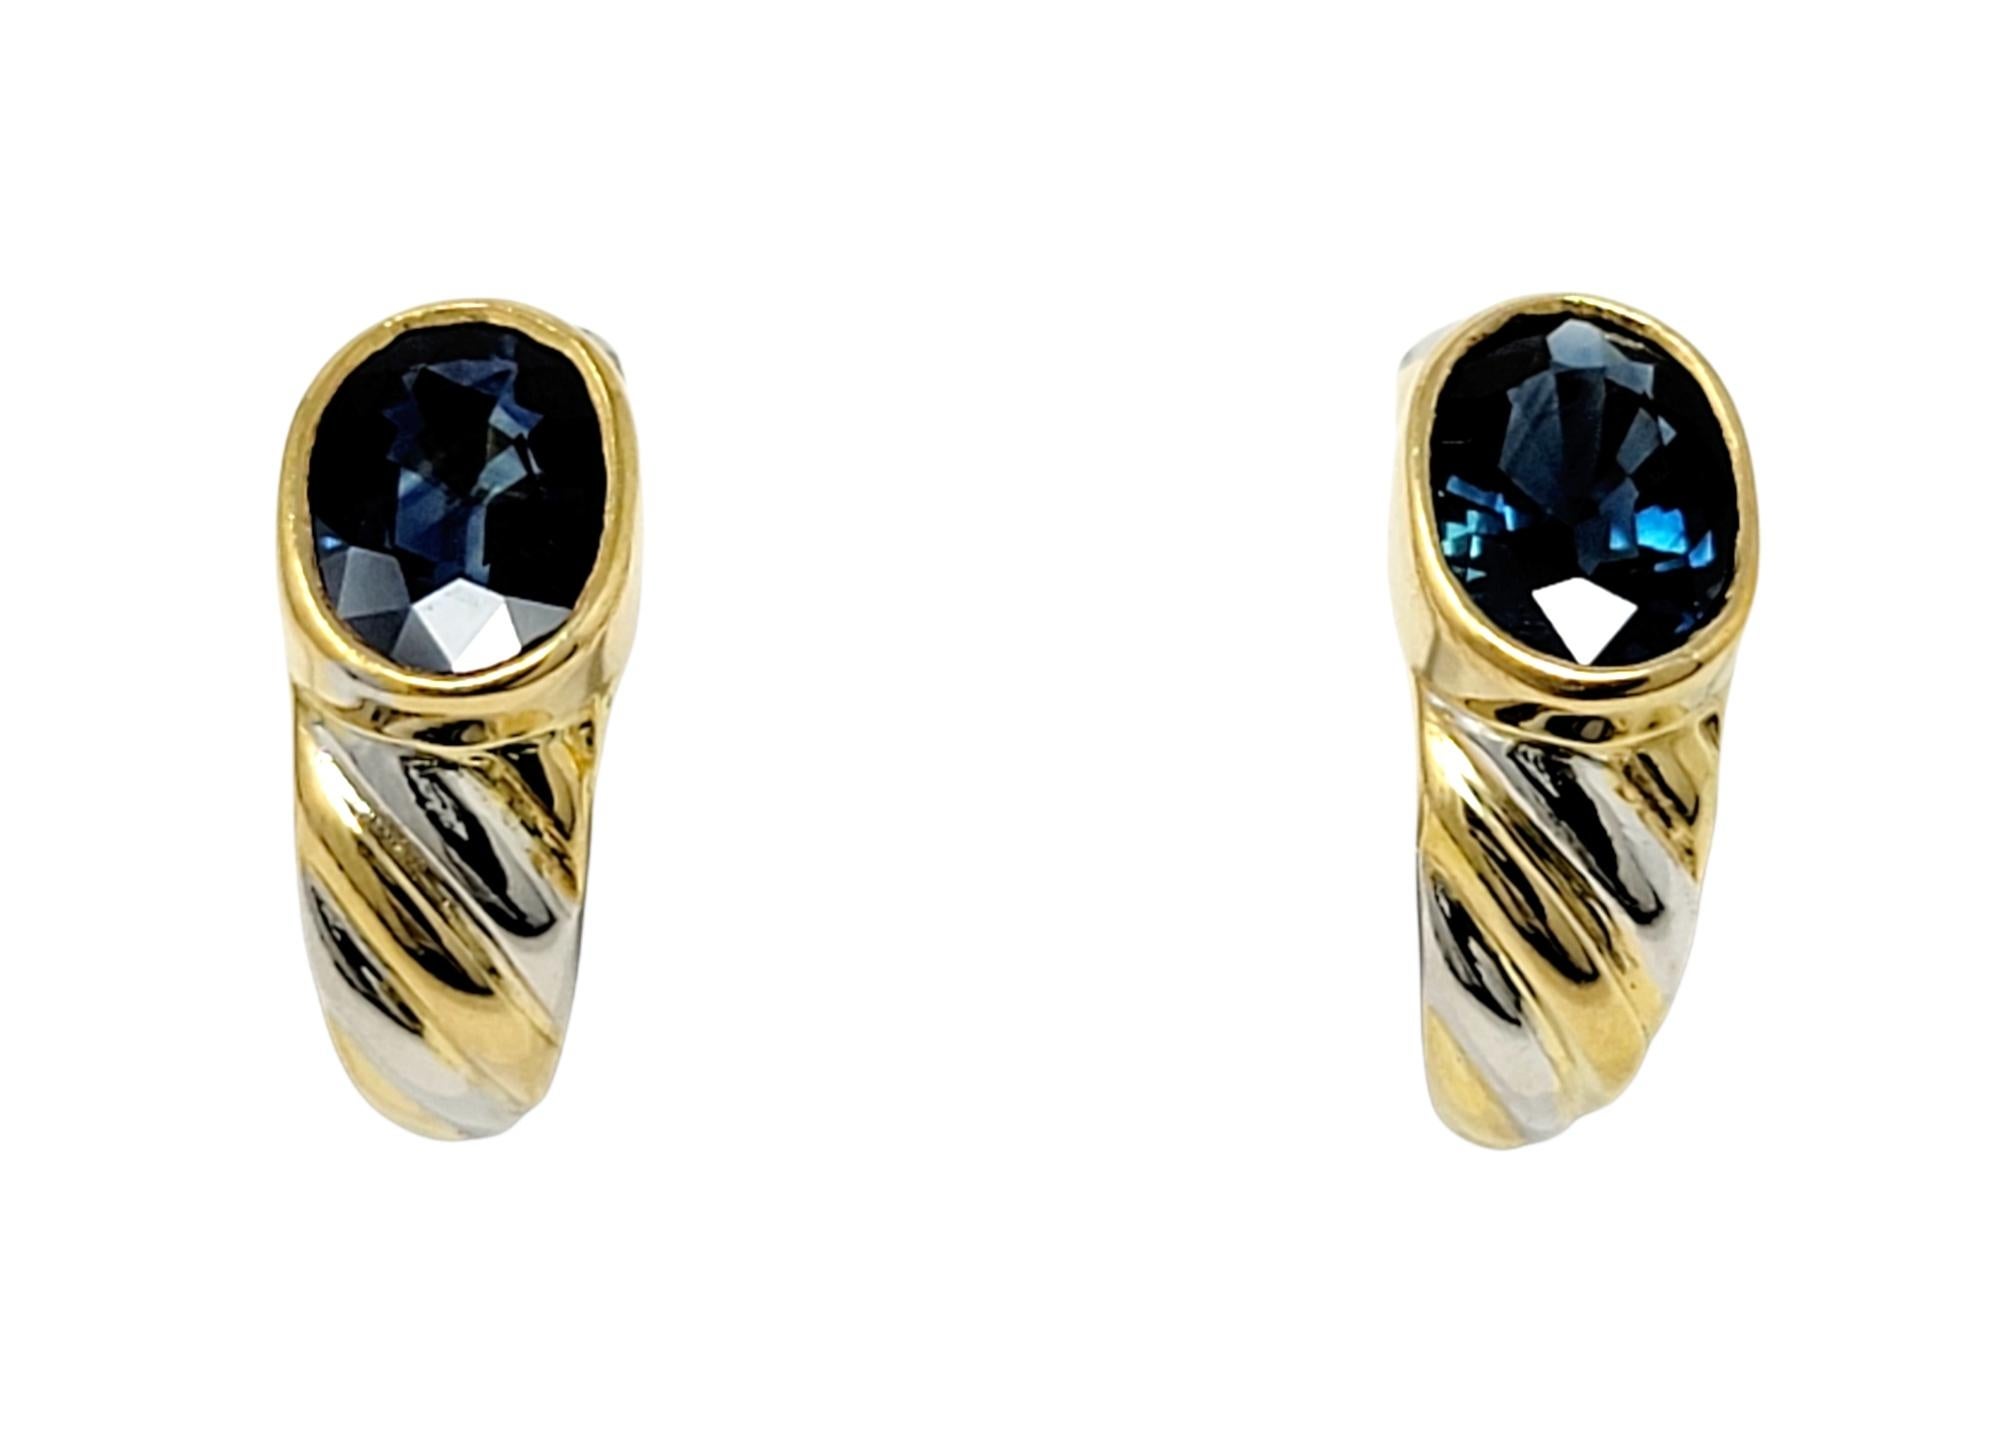 Luxurious two-tone gold twisted half hoop pierced earrings with stunning natural dark blue sapphire accents. 

Earring type: Half-Hoop
Metal: 18K Yellow & White Gold
Natural Sapphires: 2.86 carat total weight
Sapphire cut: Oval 
Weight: 6.3